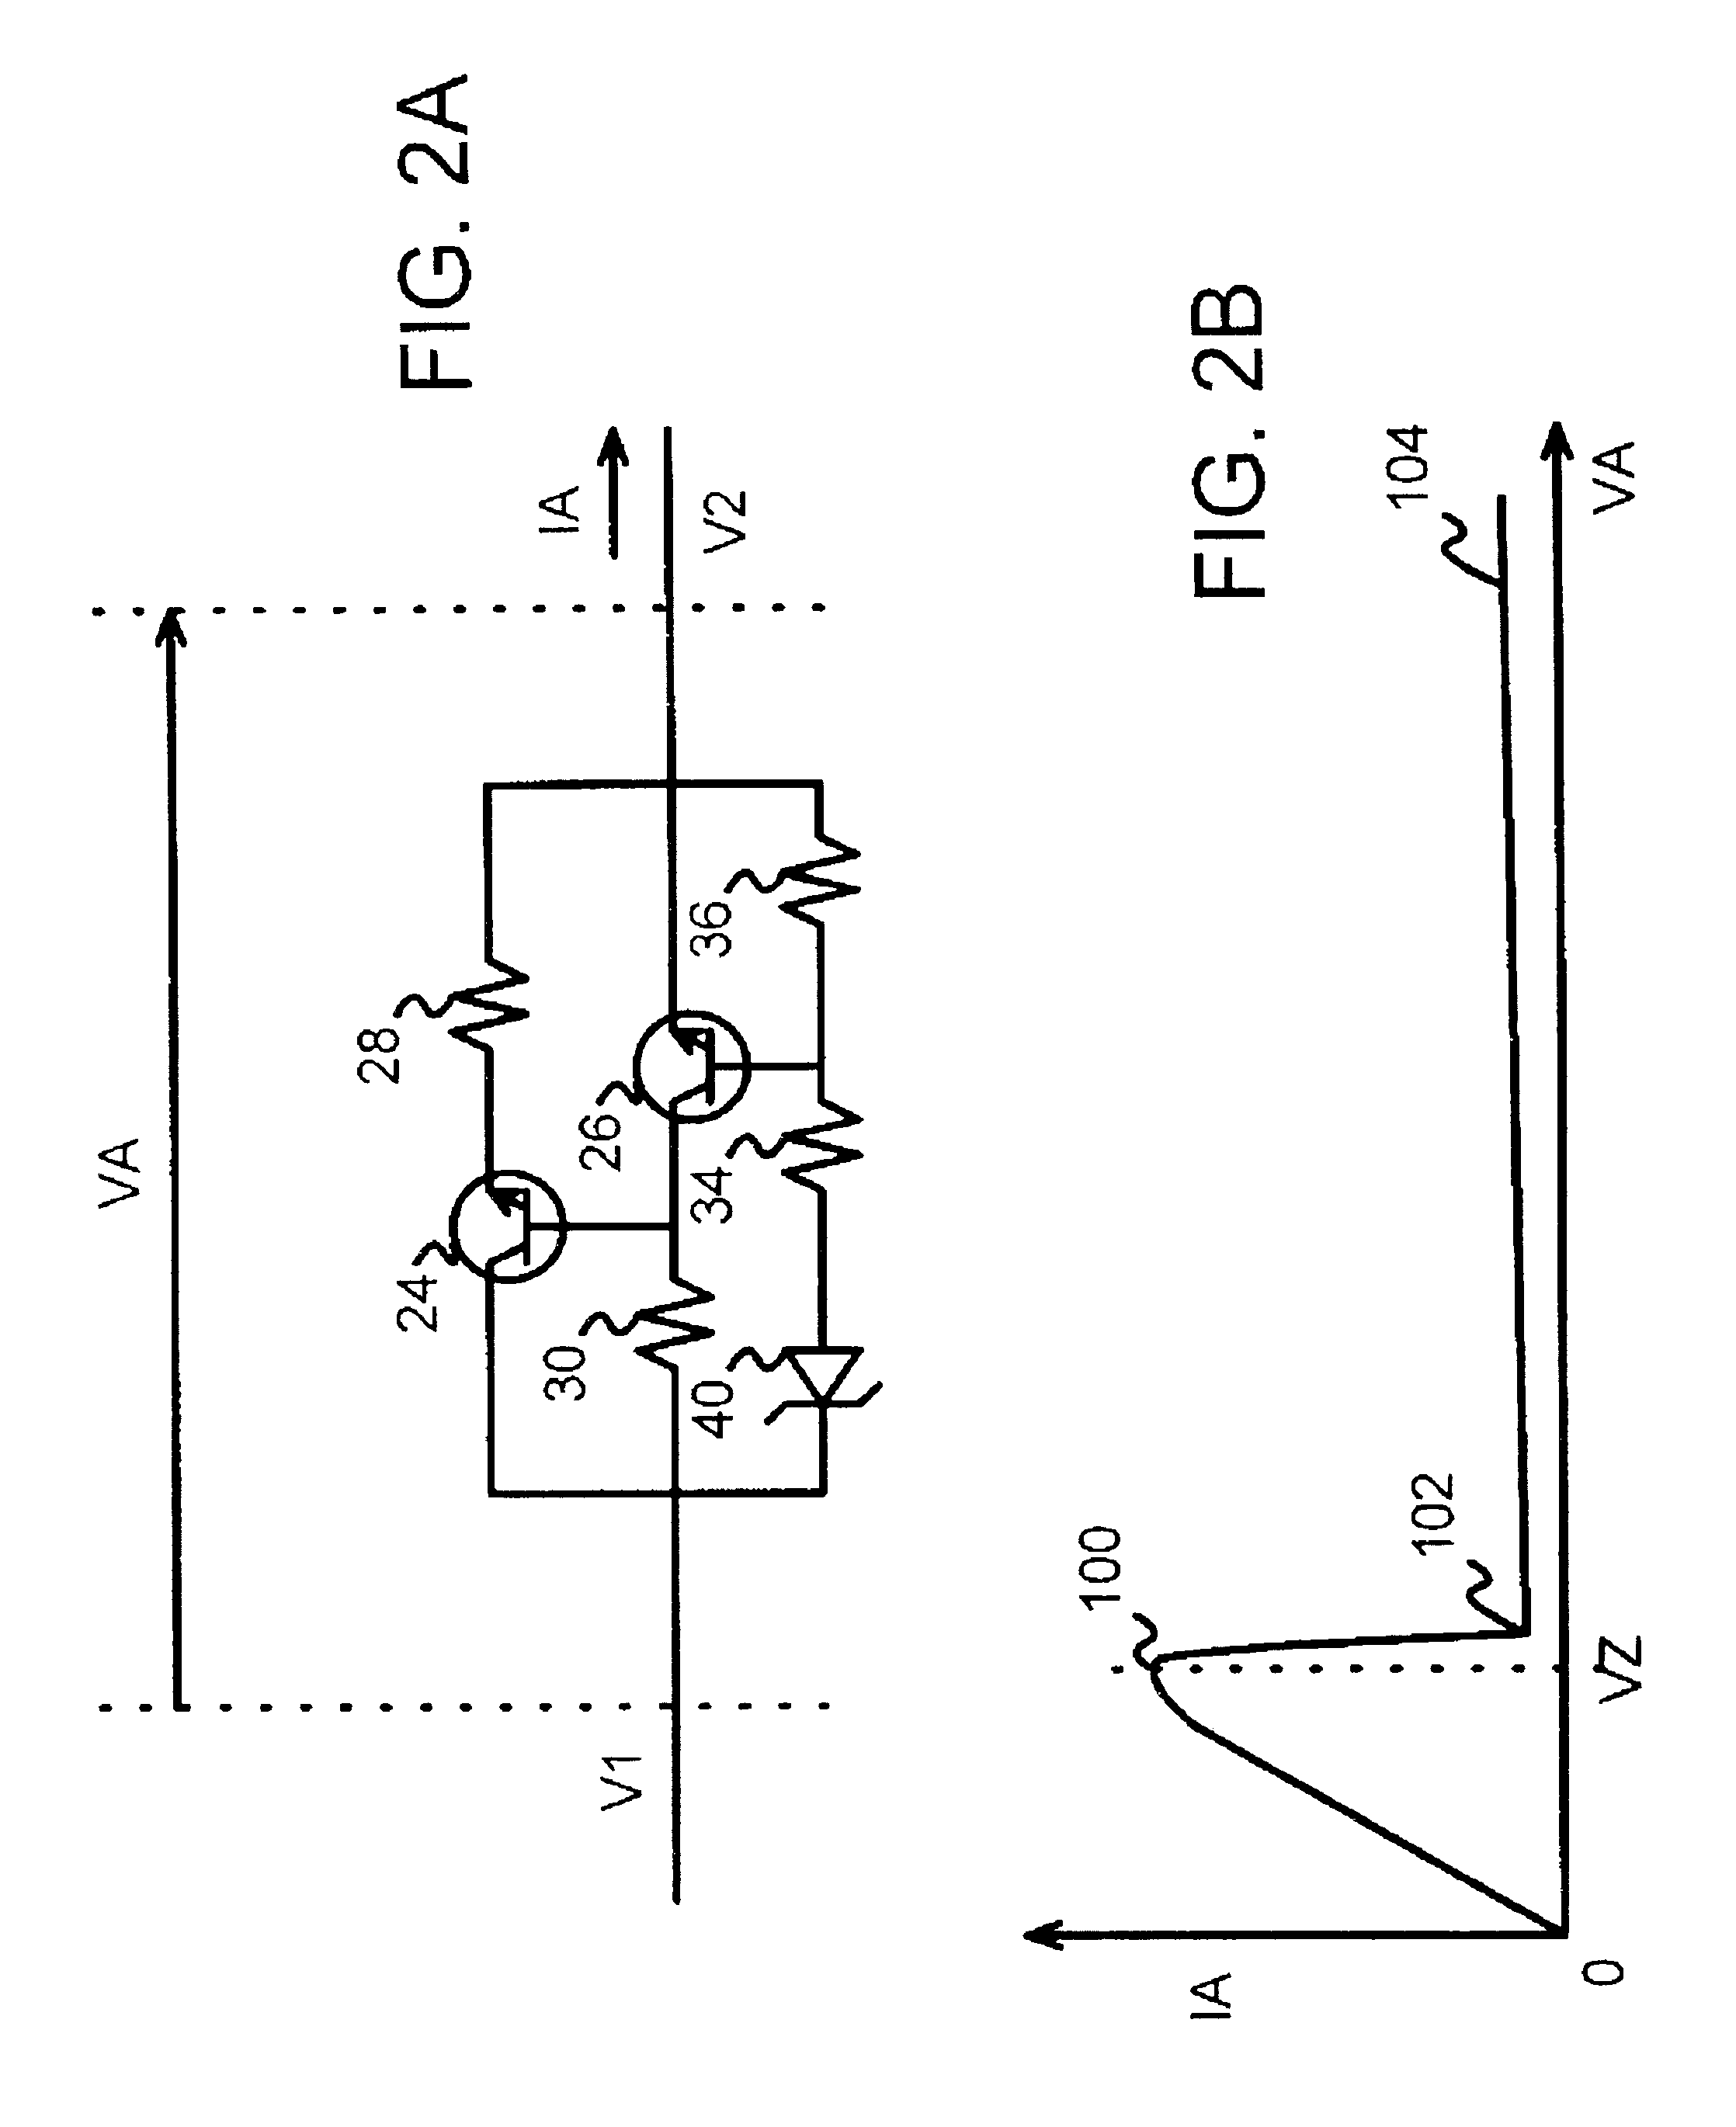 Infrared inductive light switch using triac trigger-control and early-charging-peak current limiter with adjustable power consumption